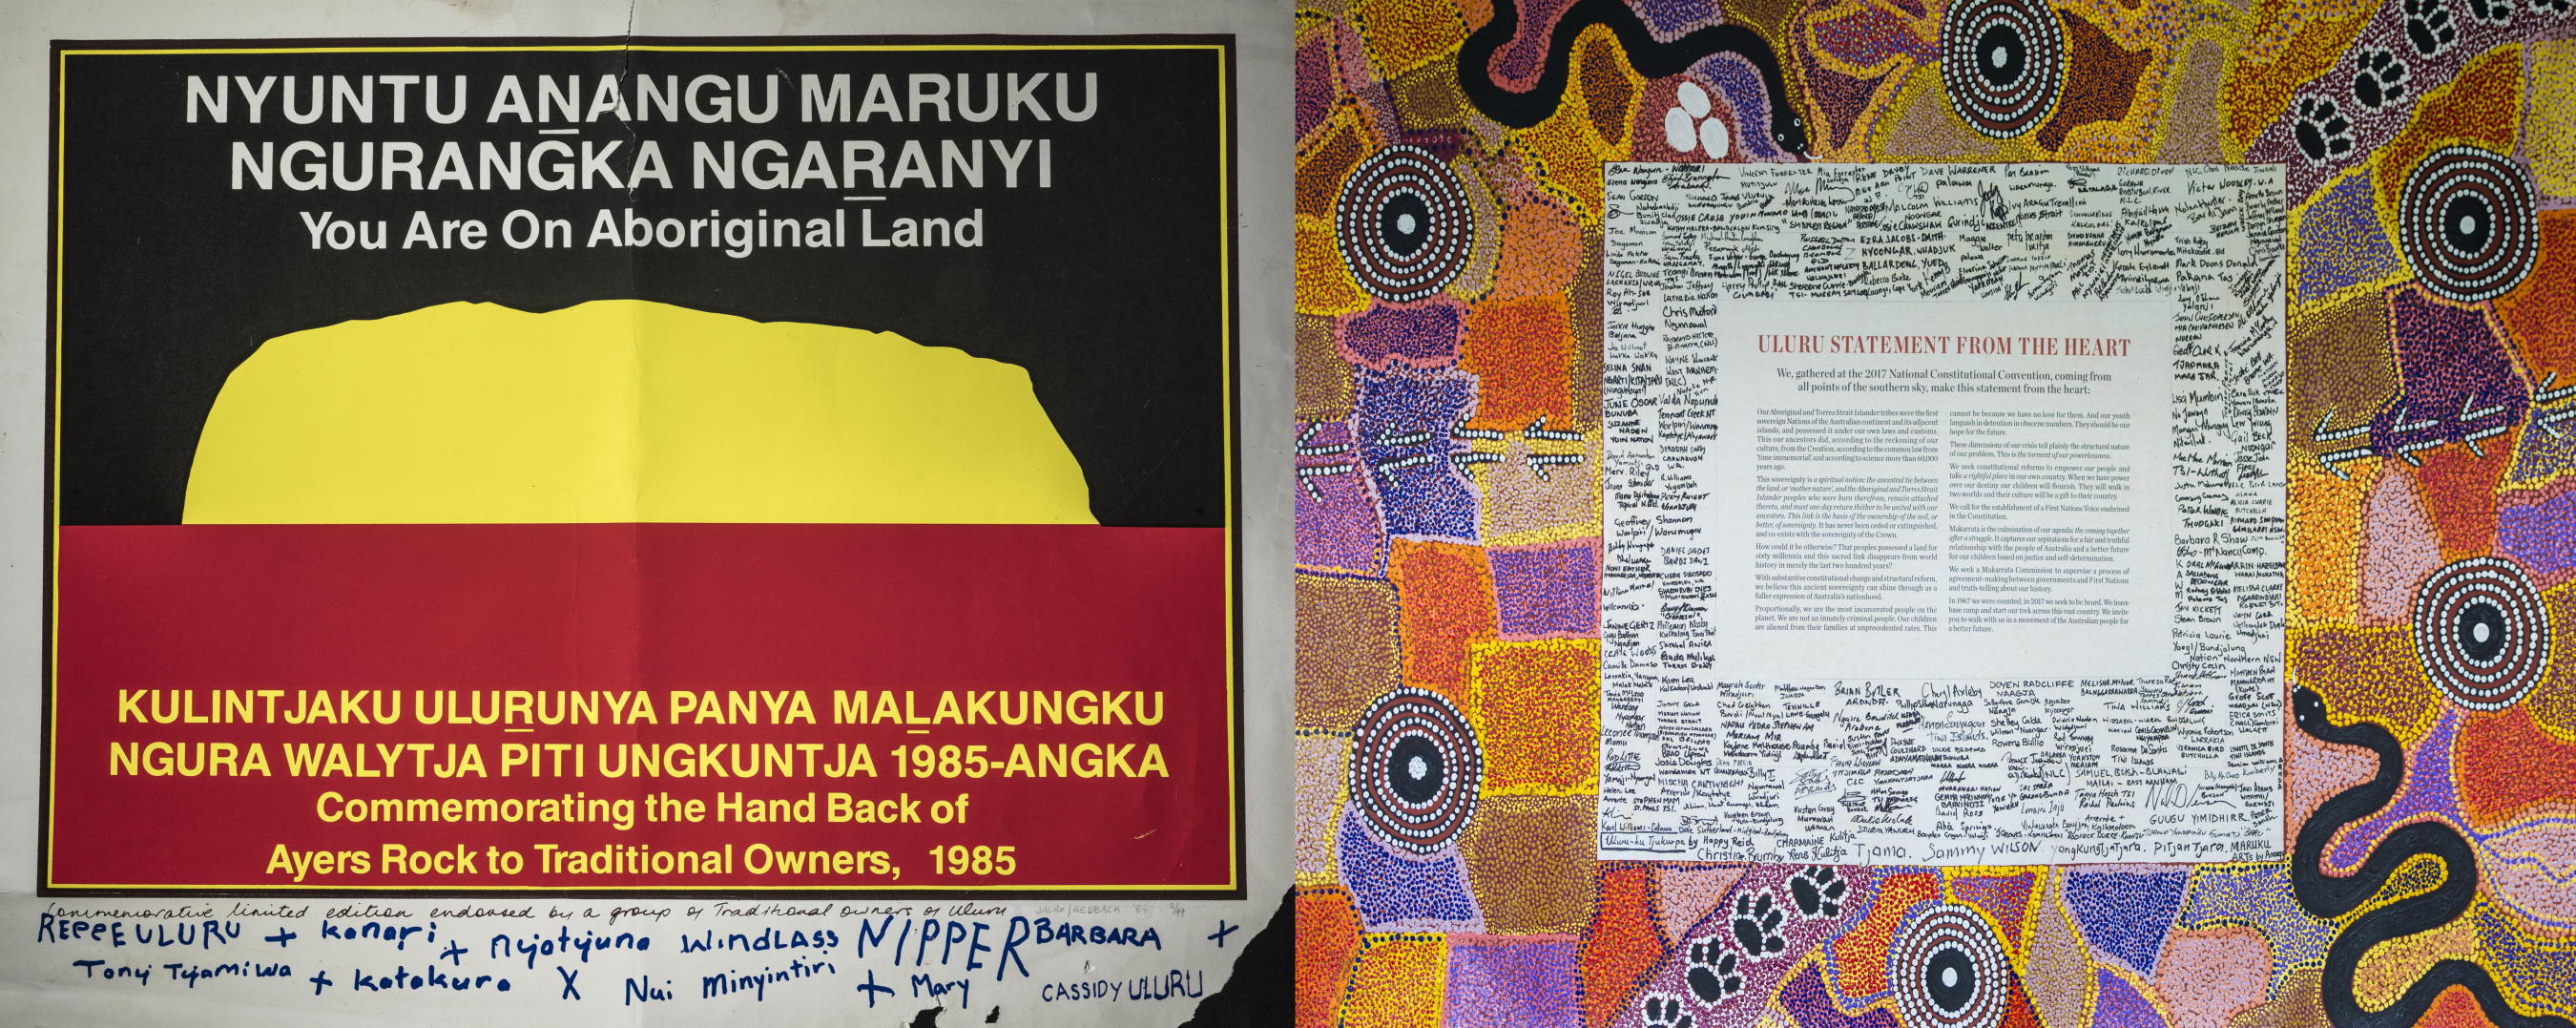 On the left is the Uluru Handback poster. The poster has same colour scheme as Aboriginal flag with a yellow Uluru shape in the middle. White text saying "You are on Aboriginal land". On the left is the Uluru statement from the heart. The statements text and its signatory's are in the middle surrounded by an artwork depicting important tjukurpa of the area